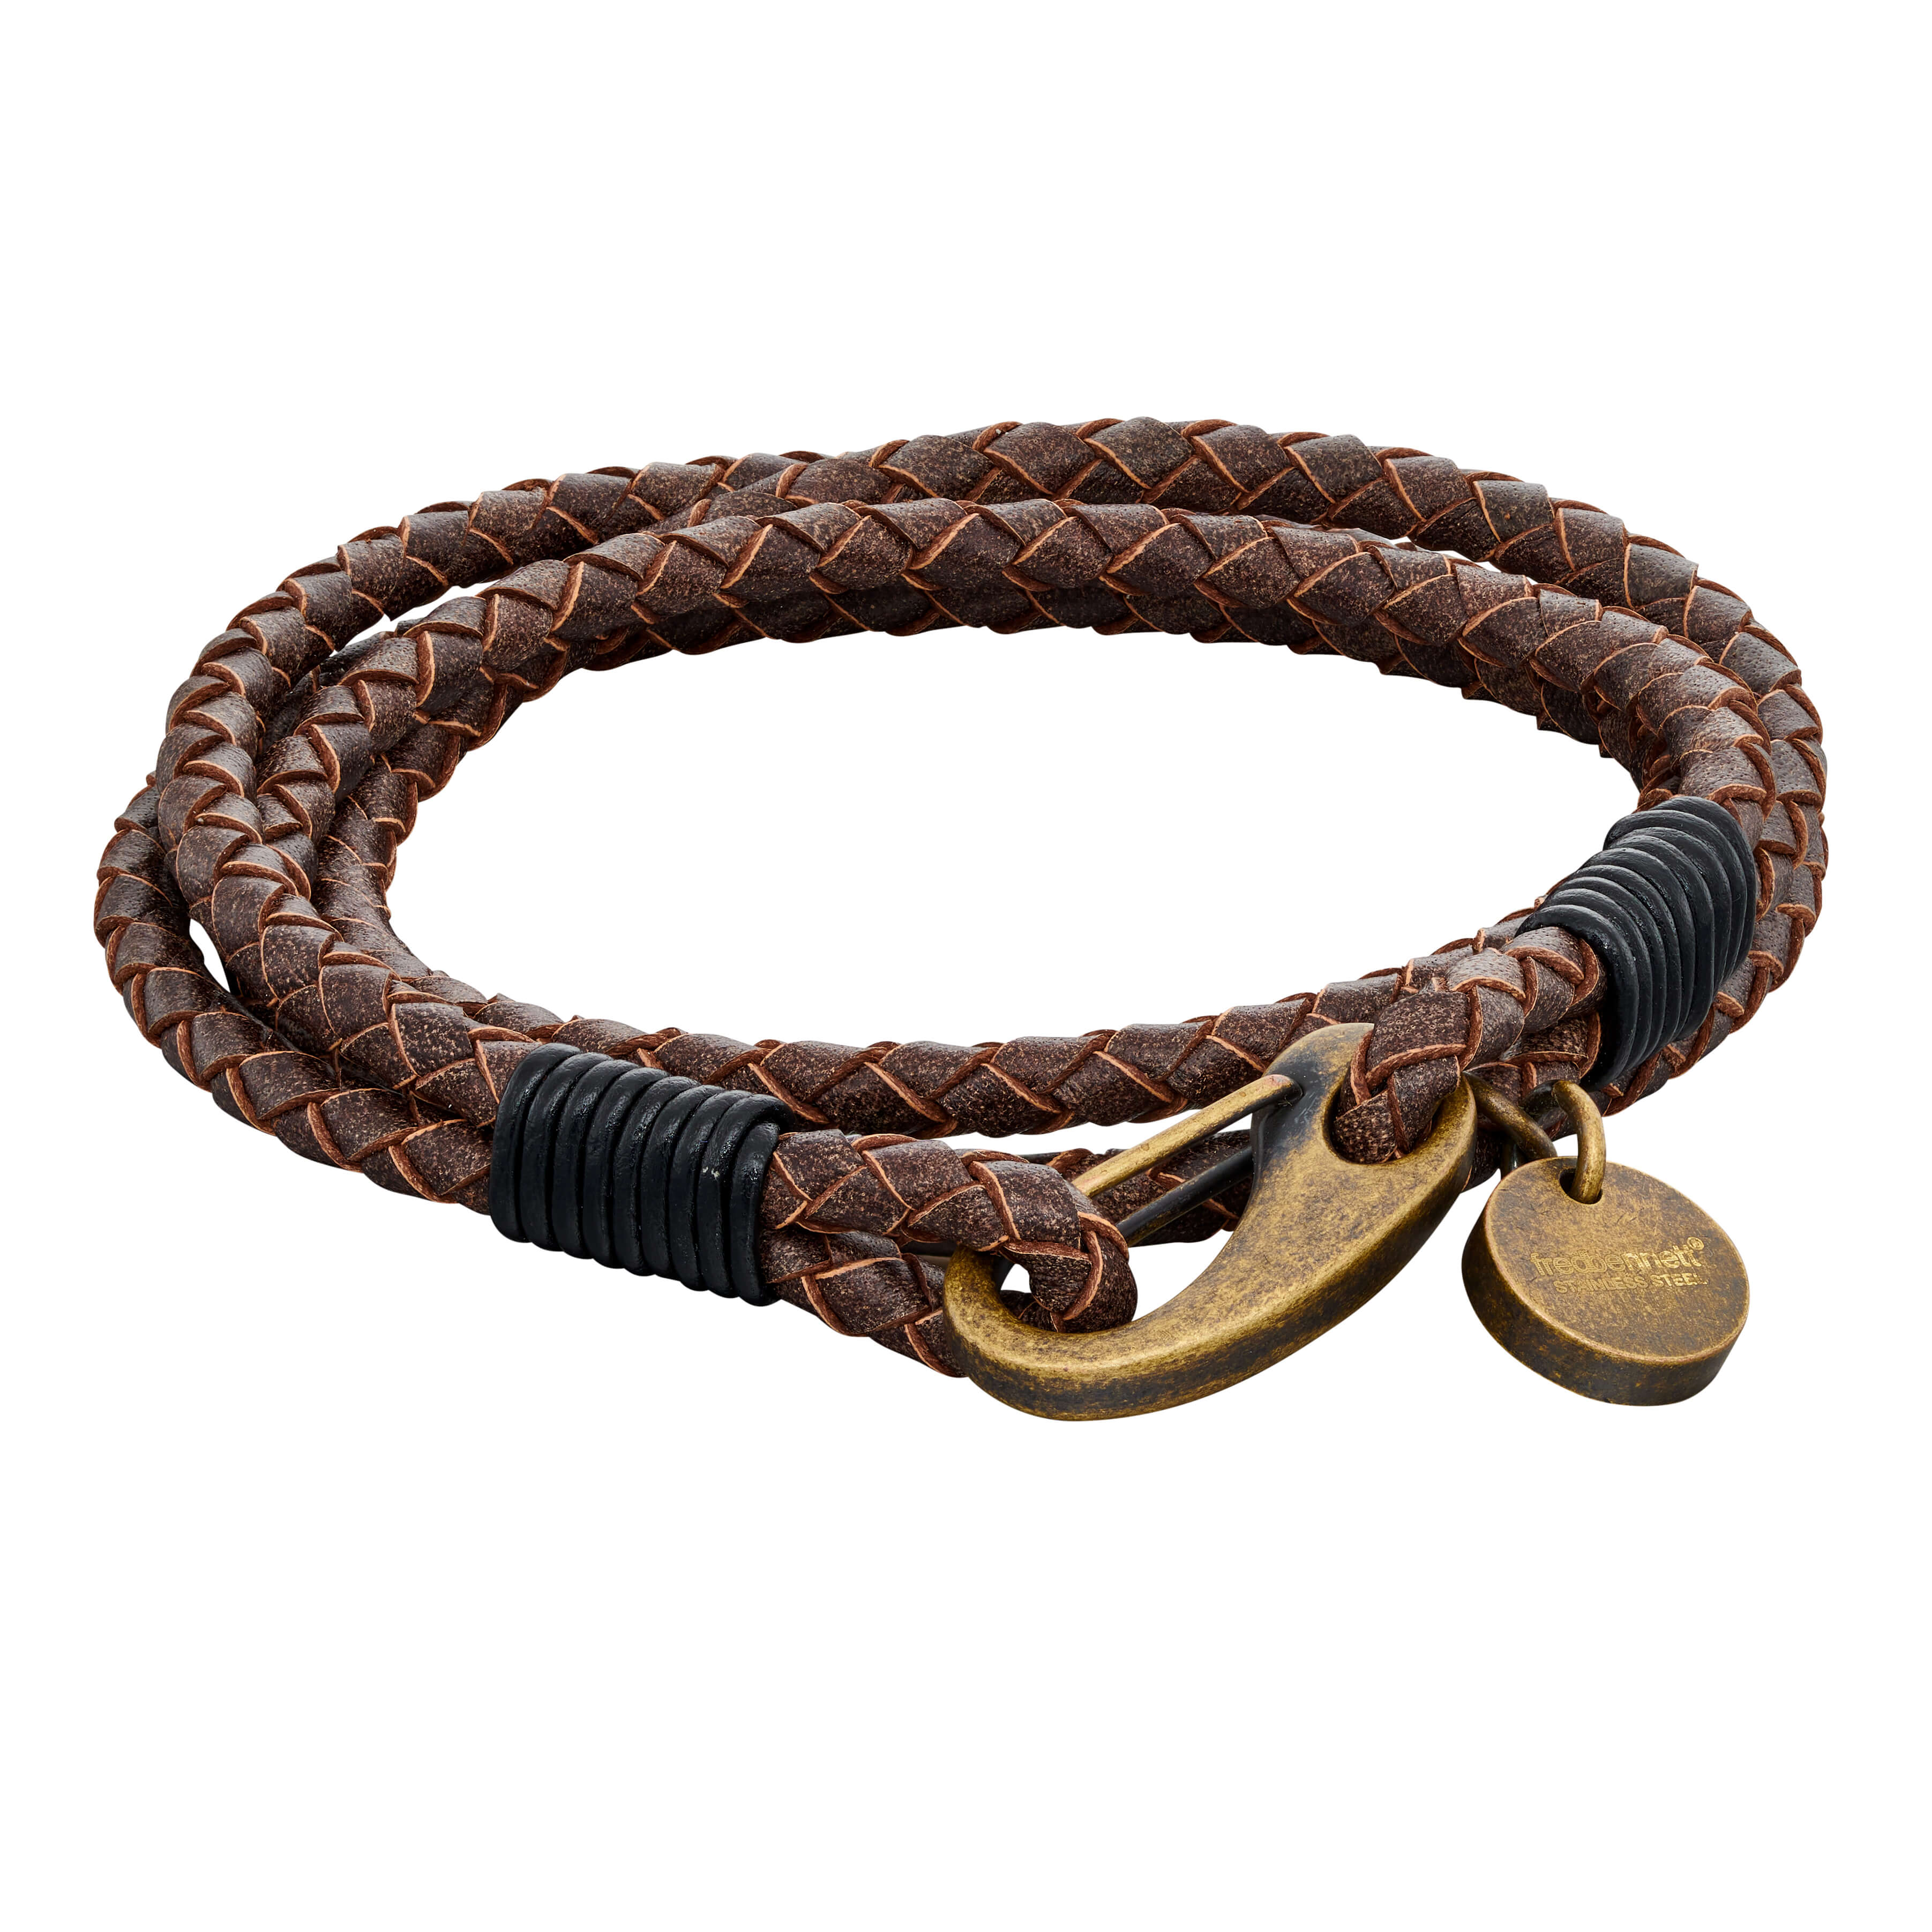 Stainless Steel & Brown Woven Leather Double Strand Bracelet - FB0010 - Hallmark Jewellers Formby & The Jewellers Bench Widnes